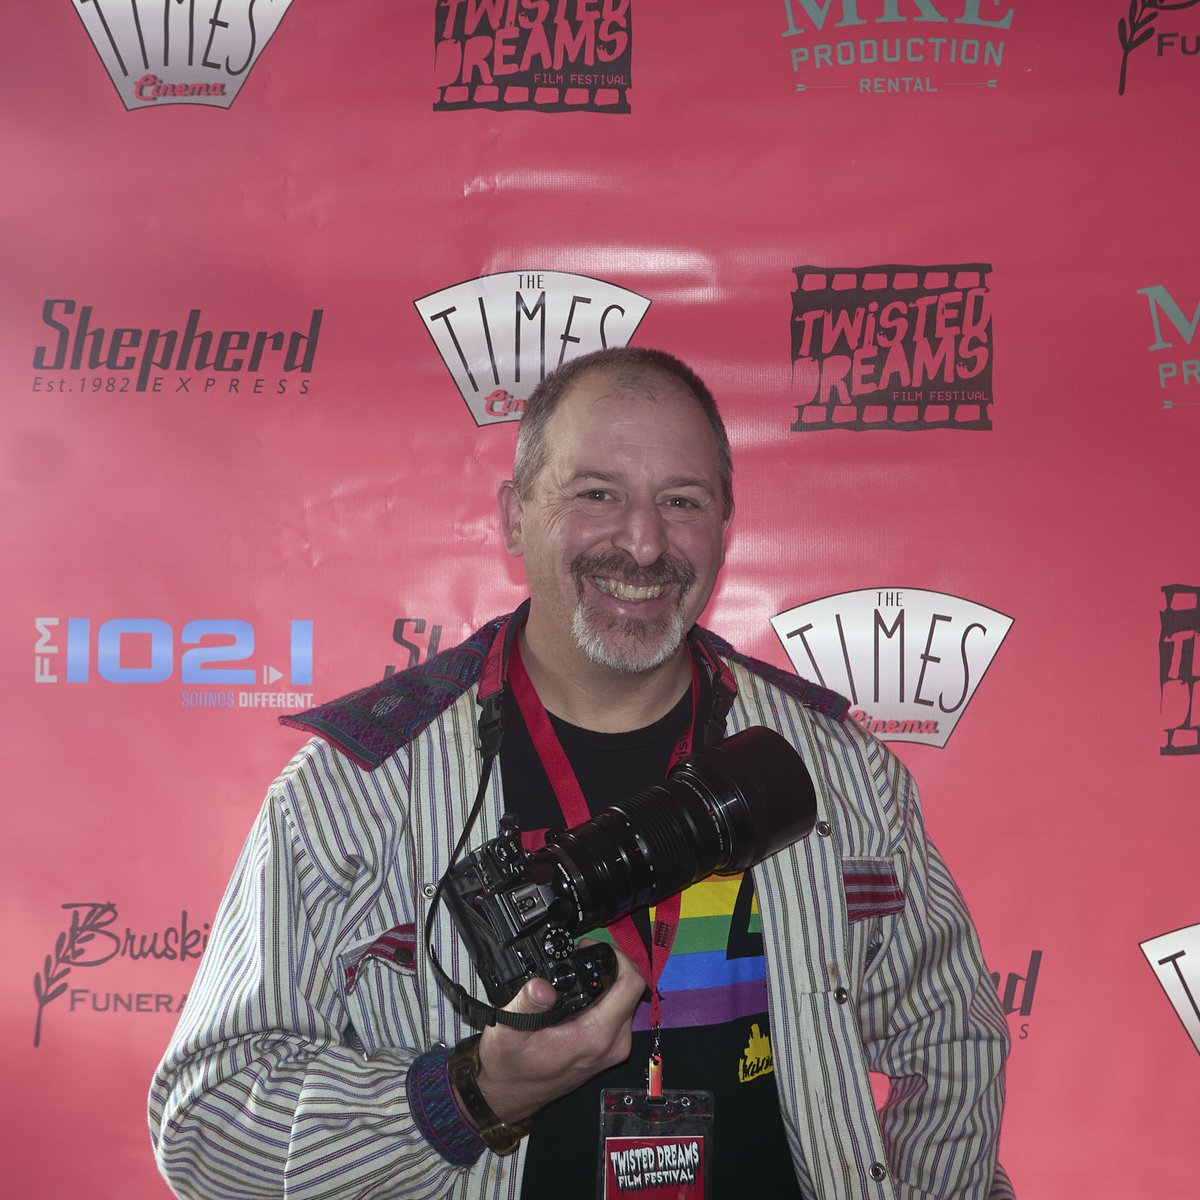 The @TwistedDreamsFF #HorrorFilm #FilmFestival is taking a break this year, but dang, it has always been a pleasure being their photographer these past years! Looking forward to the next festival!